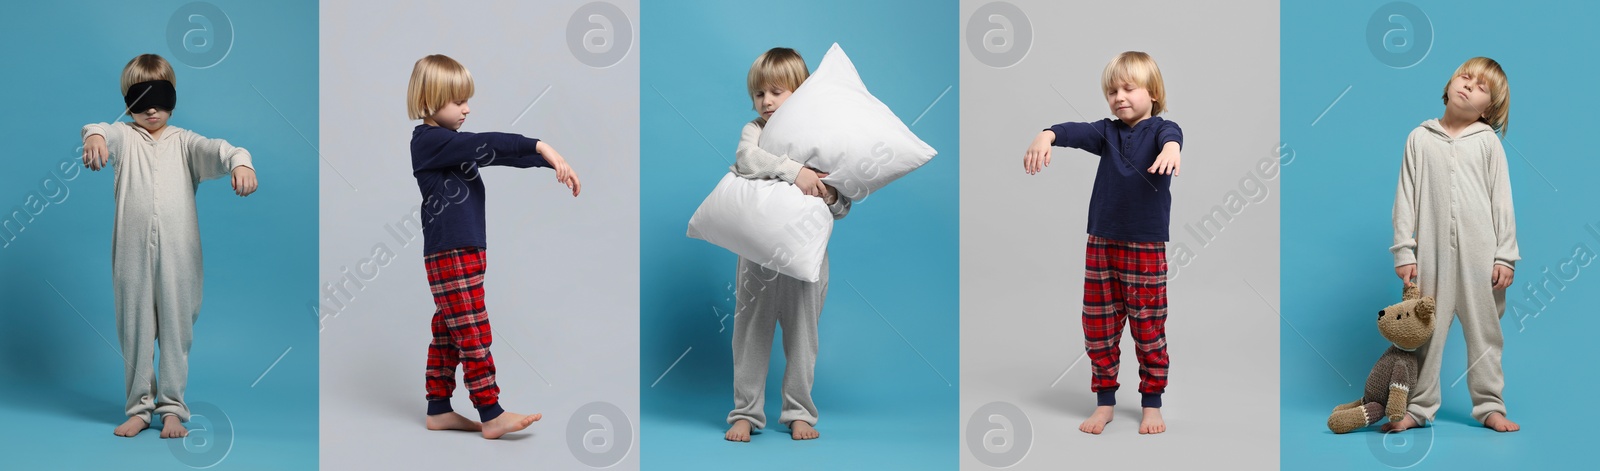 Image of Collage with photos of boy sleepwalking on different color backgrounds